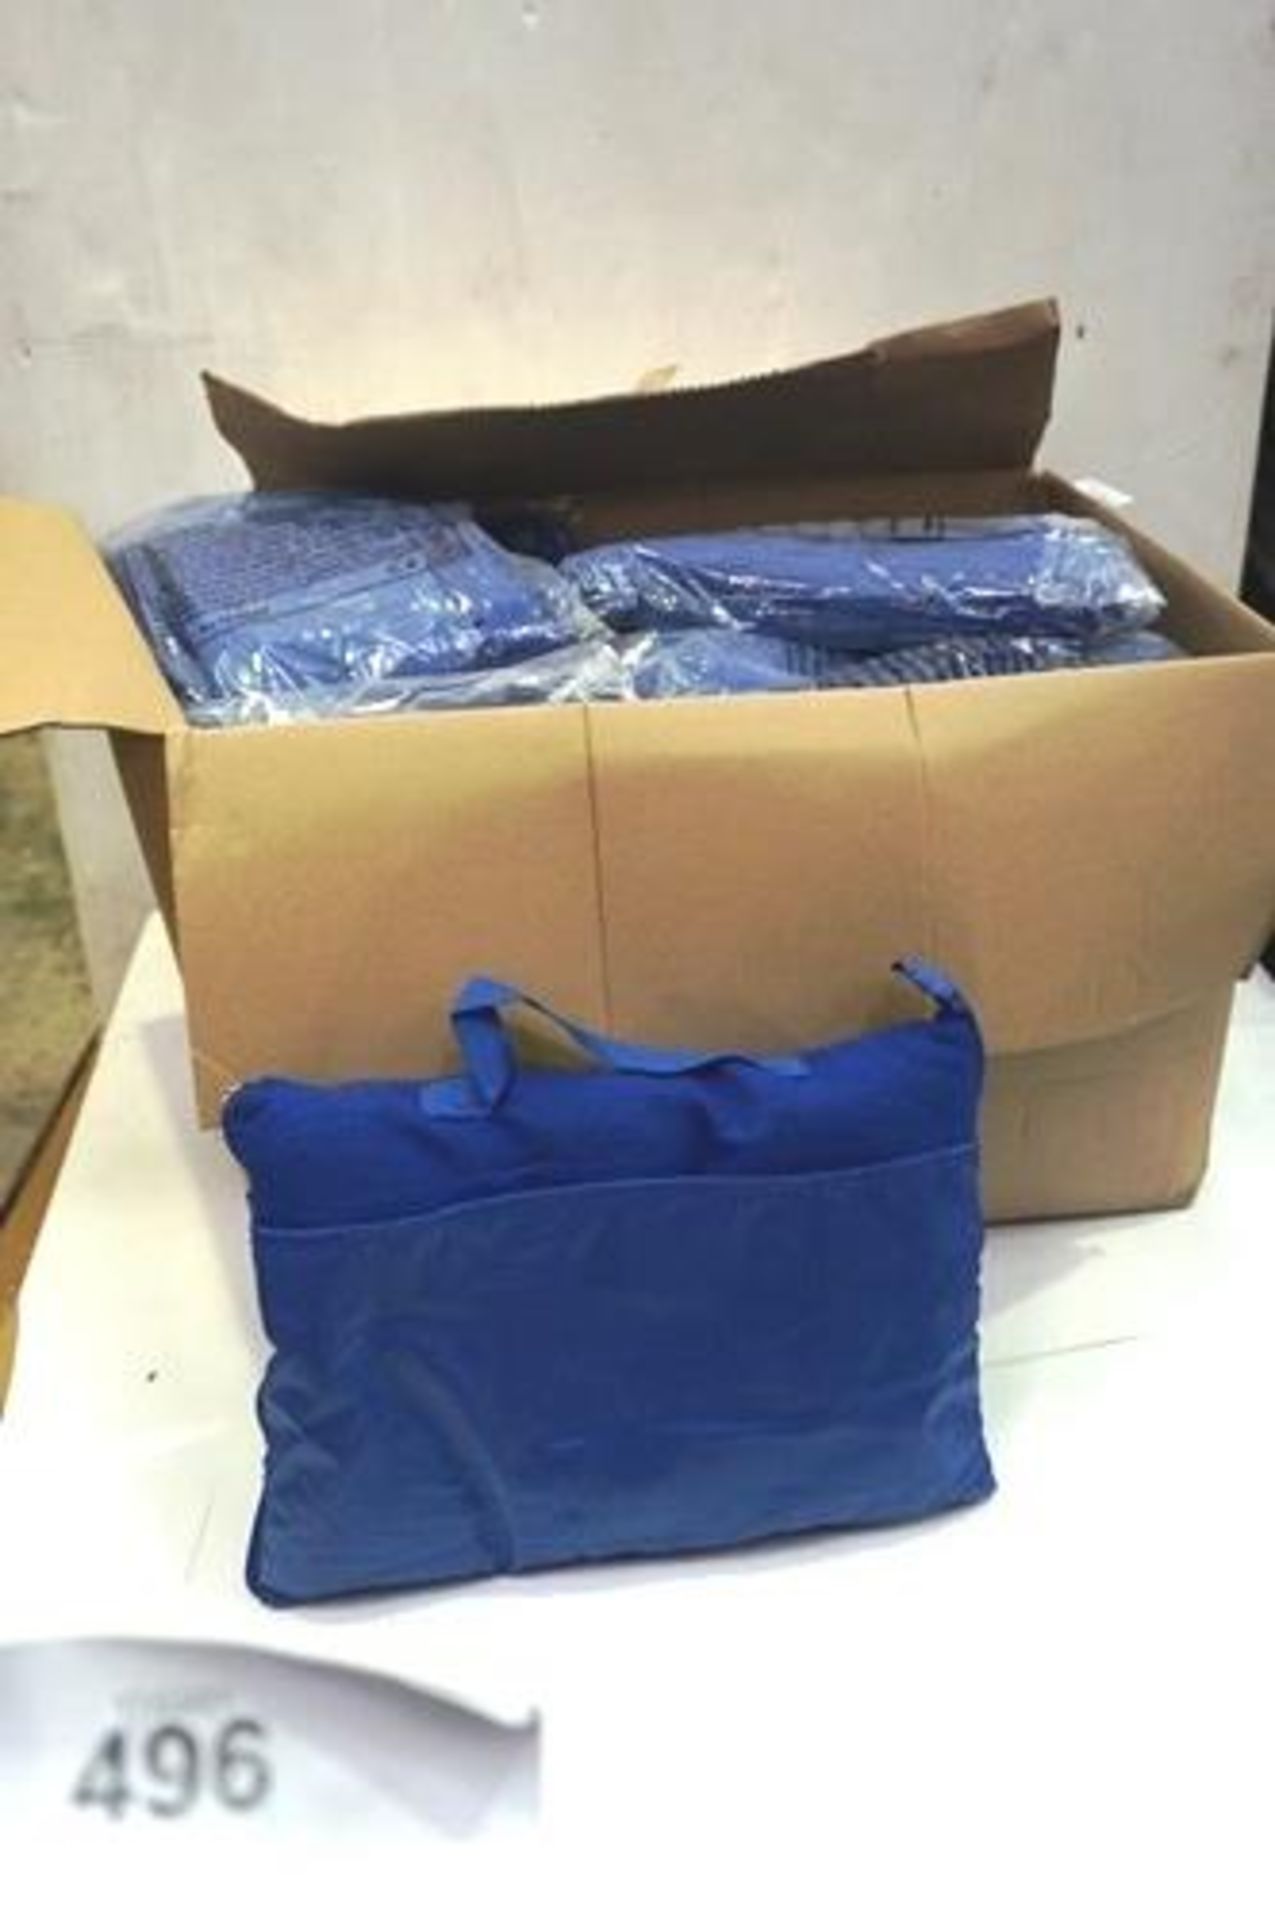 18 x blue folding blanket bags - New in bag (GS39)